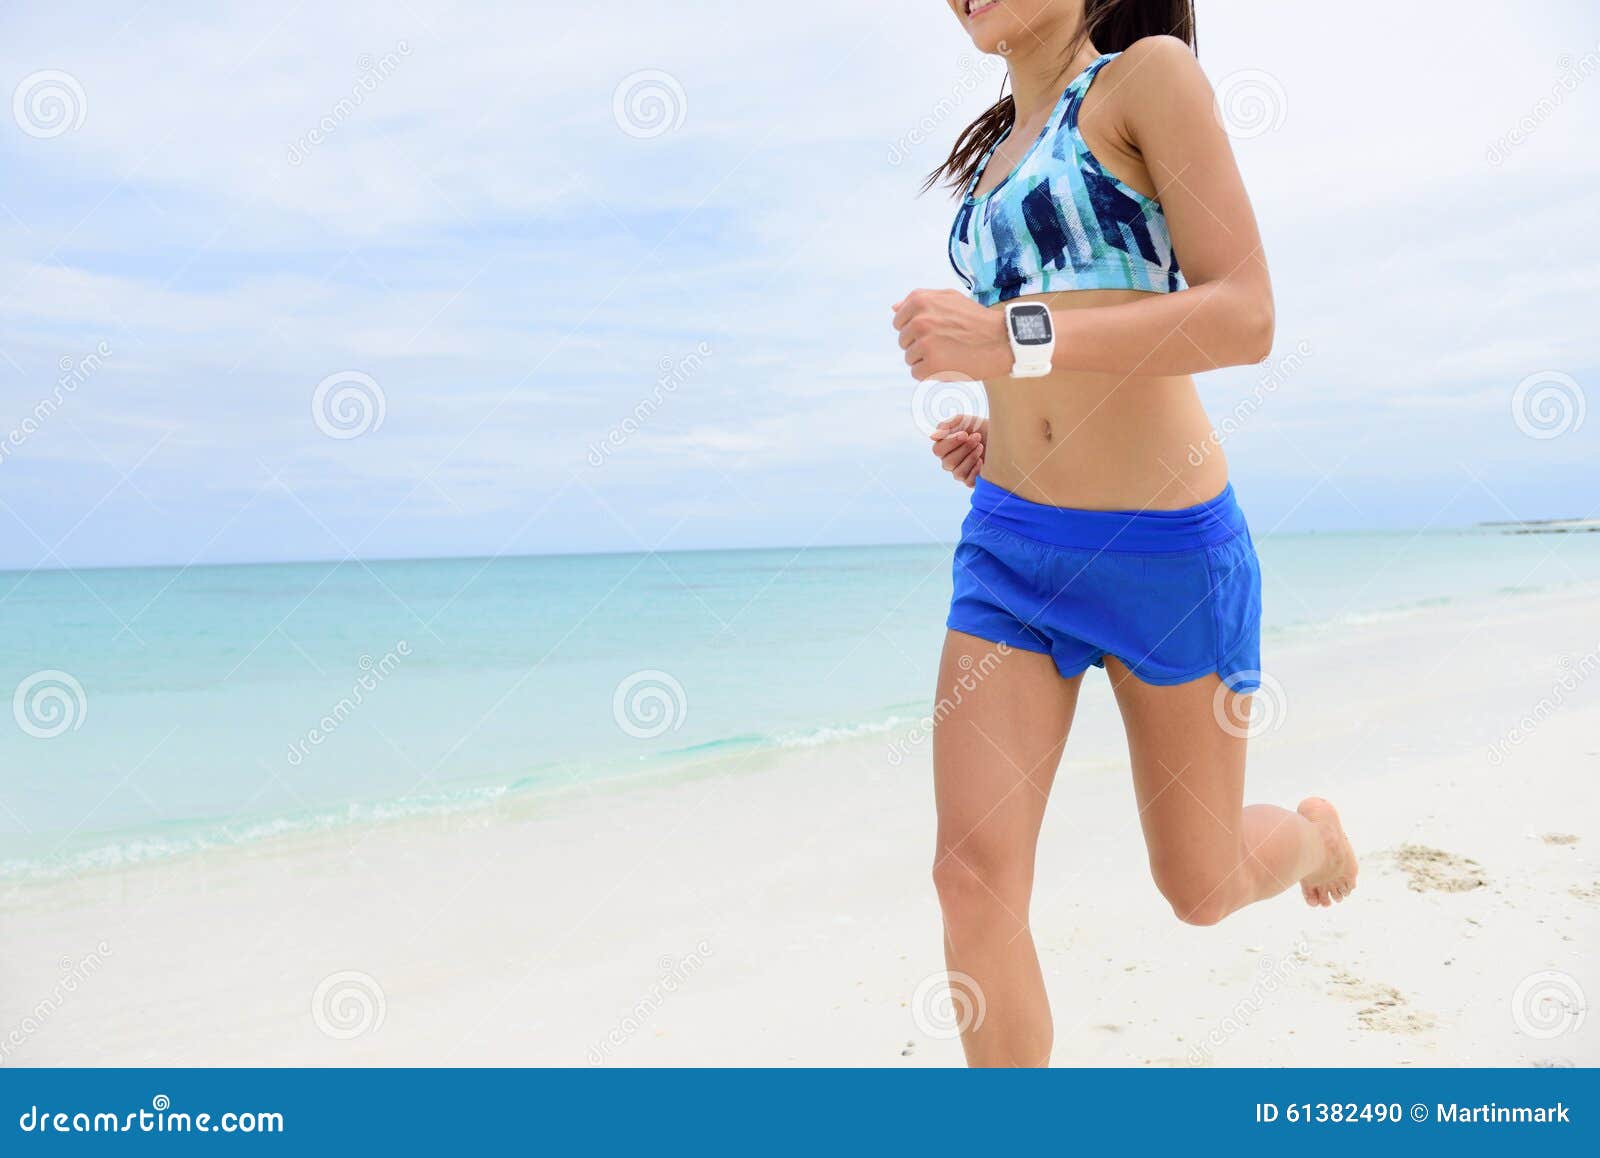 Woman in sport bra and shorts at beach photo – Free Grey Image on